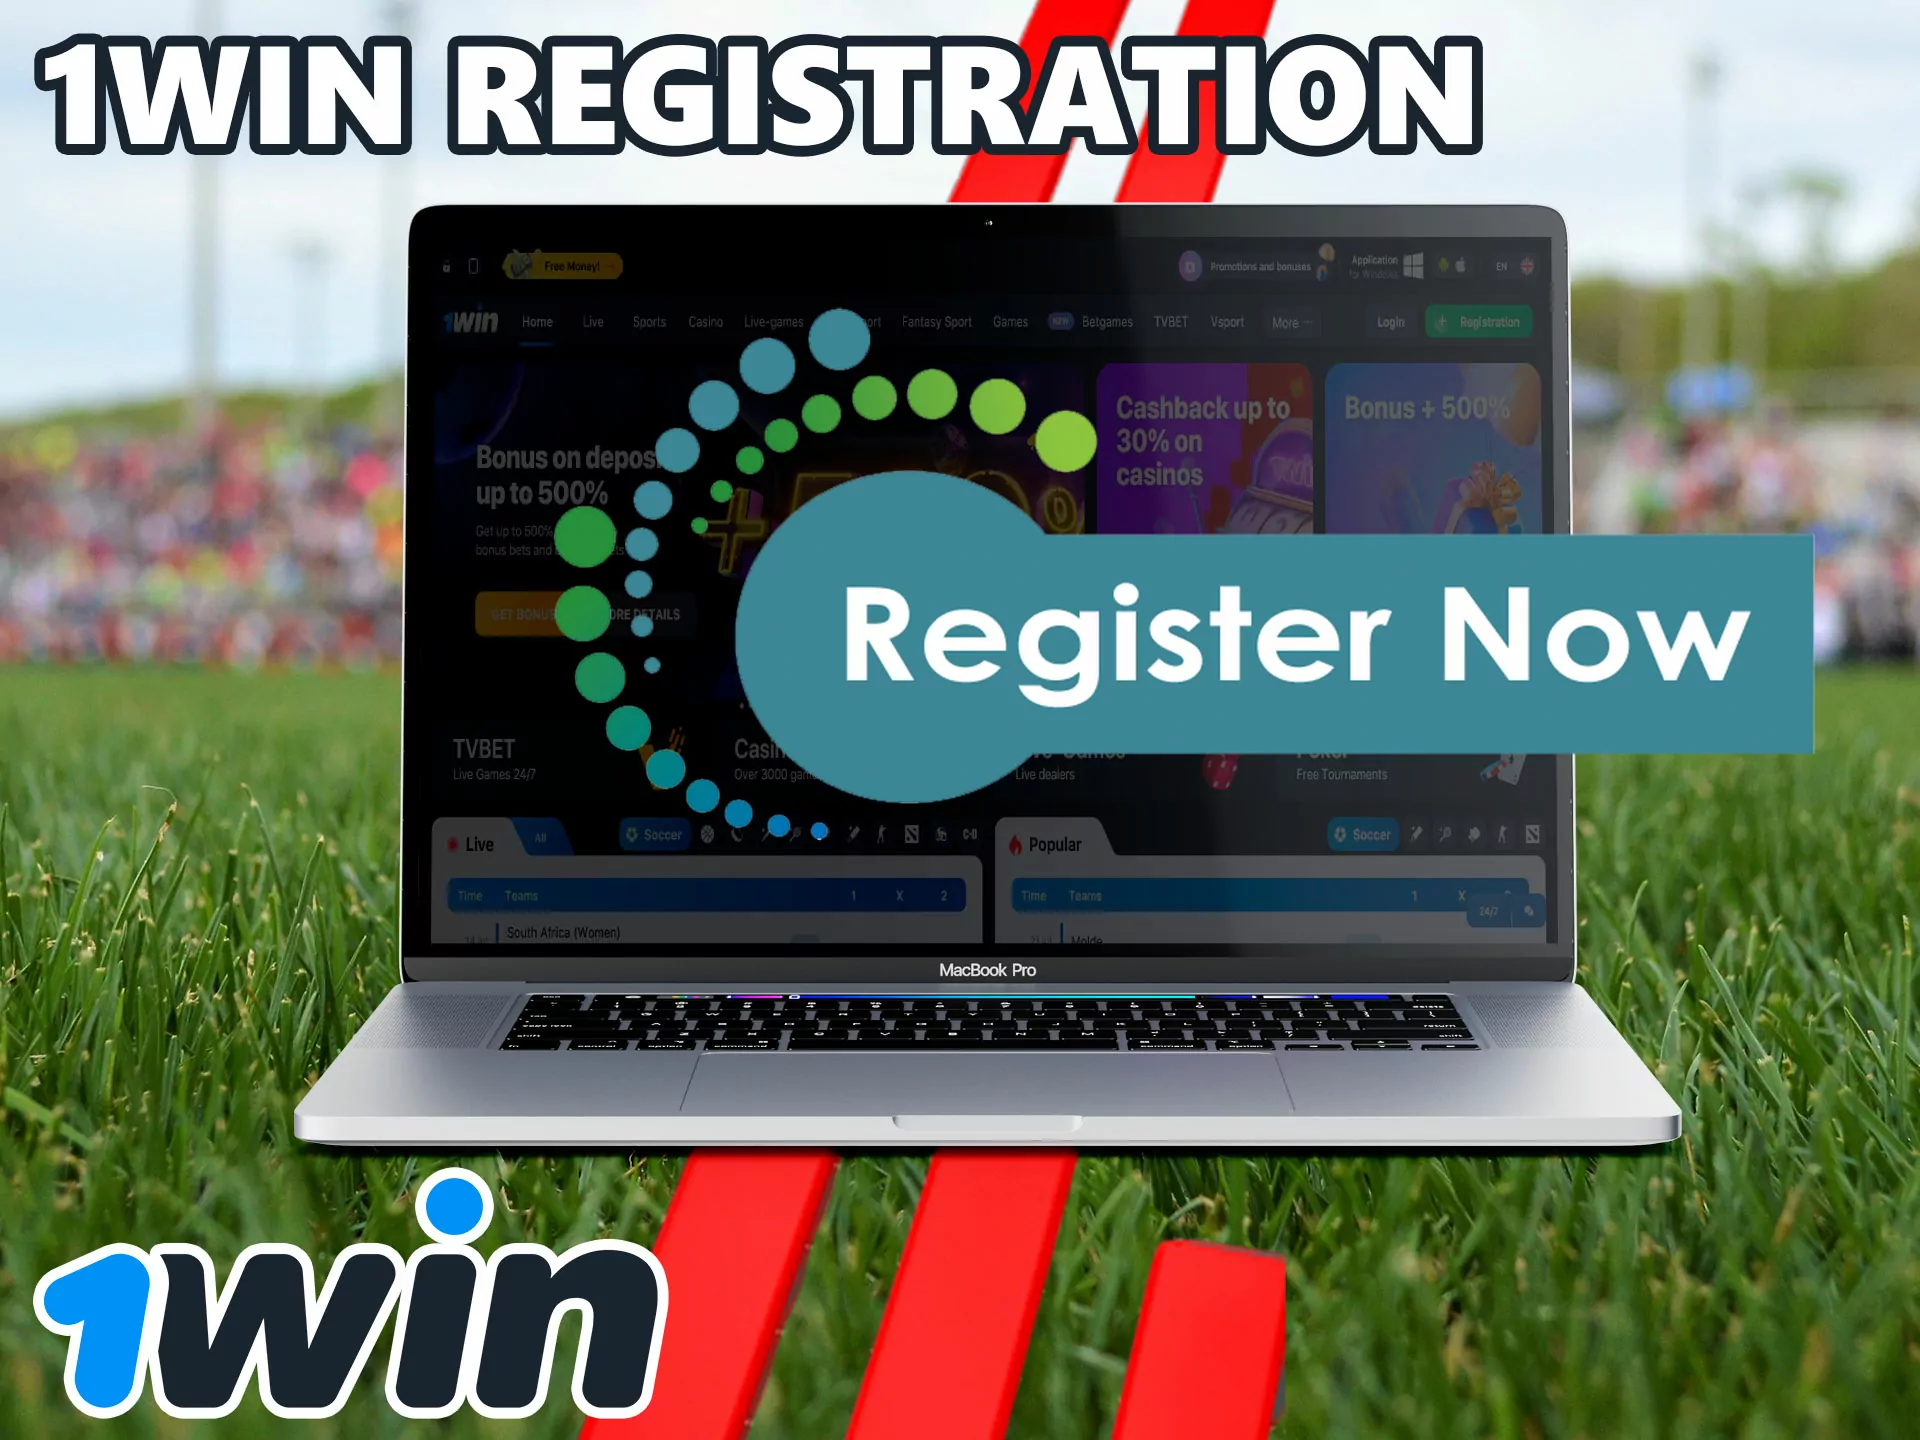 10 Biggest 1win register Mistakes You Can Easily Avoid